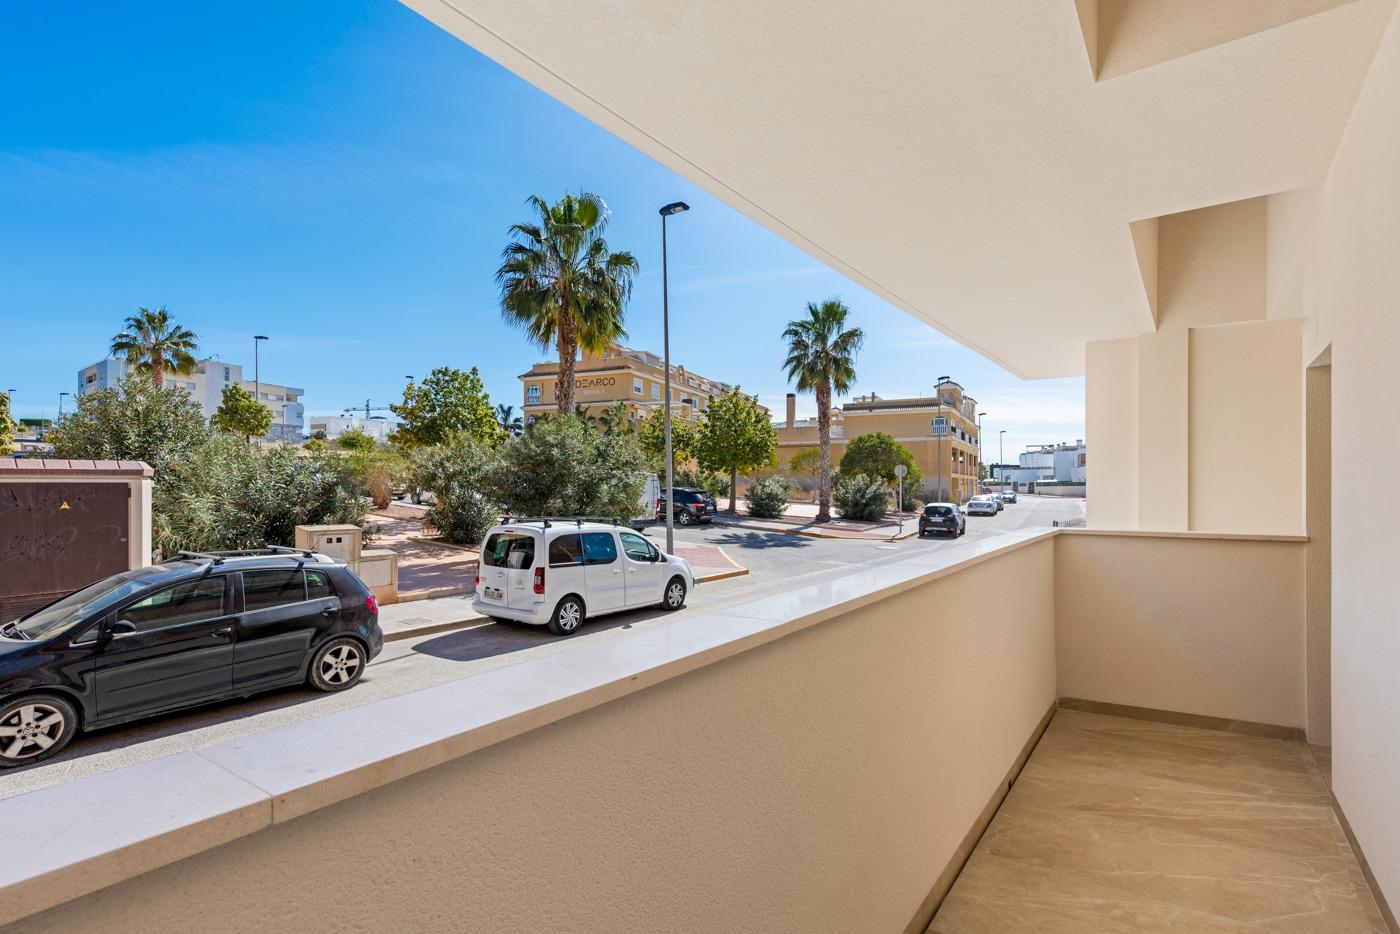 Penthouse for sale in Alicante 24